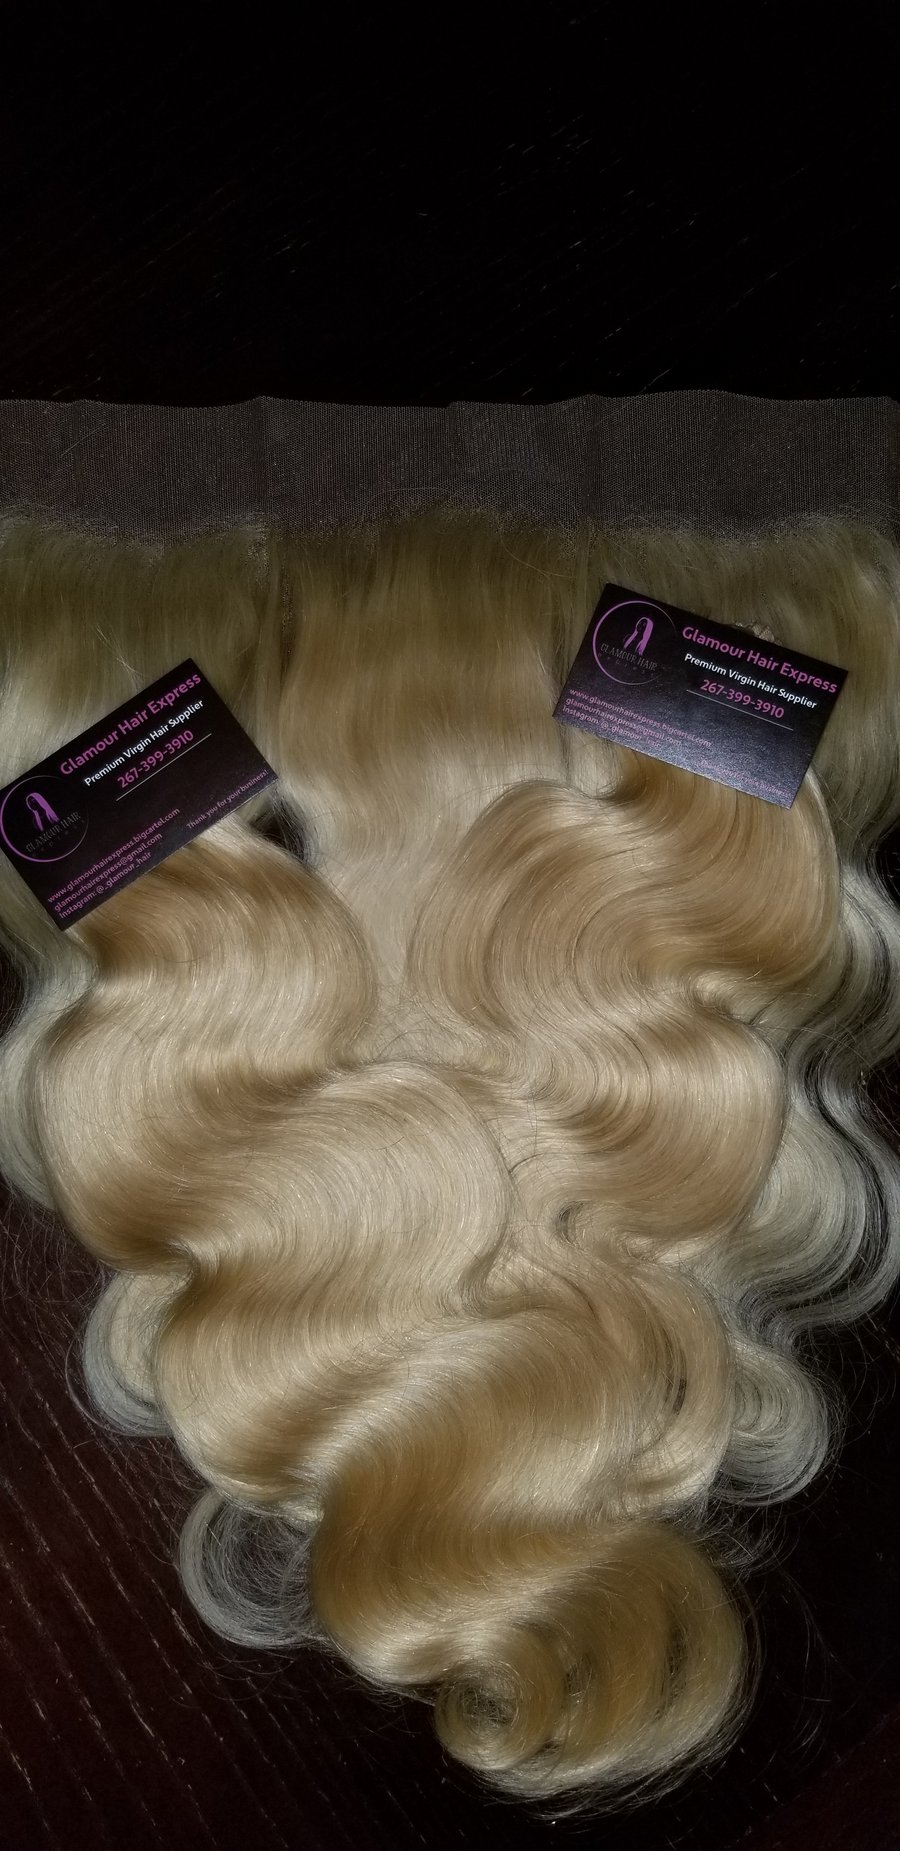 Image of 613 Blonde Lace Frontal (13"x4")